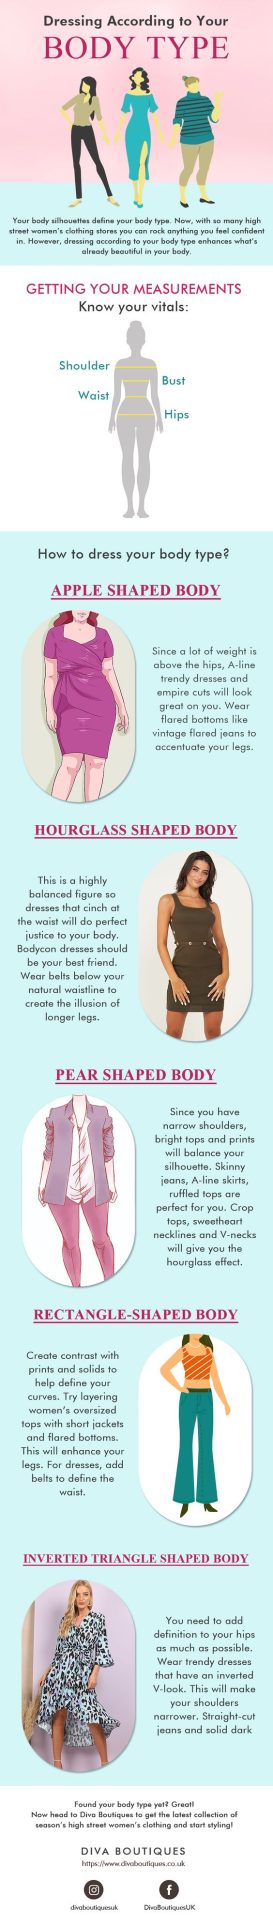 How to Dress According to your Body Type?